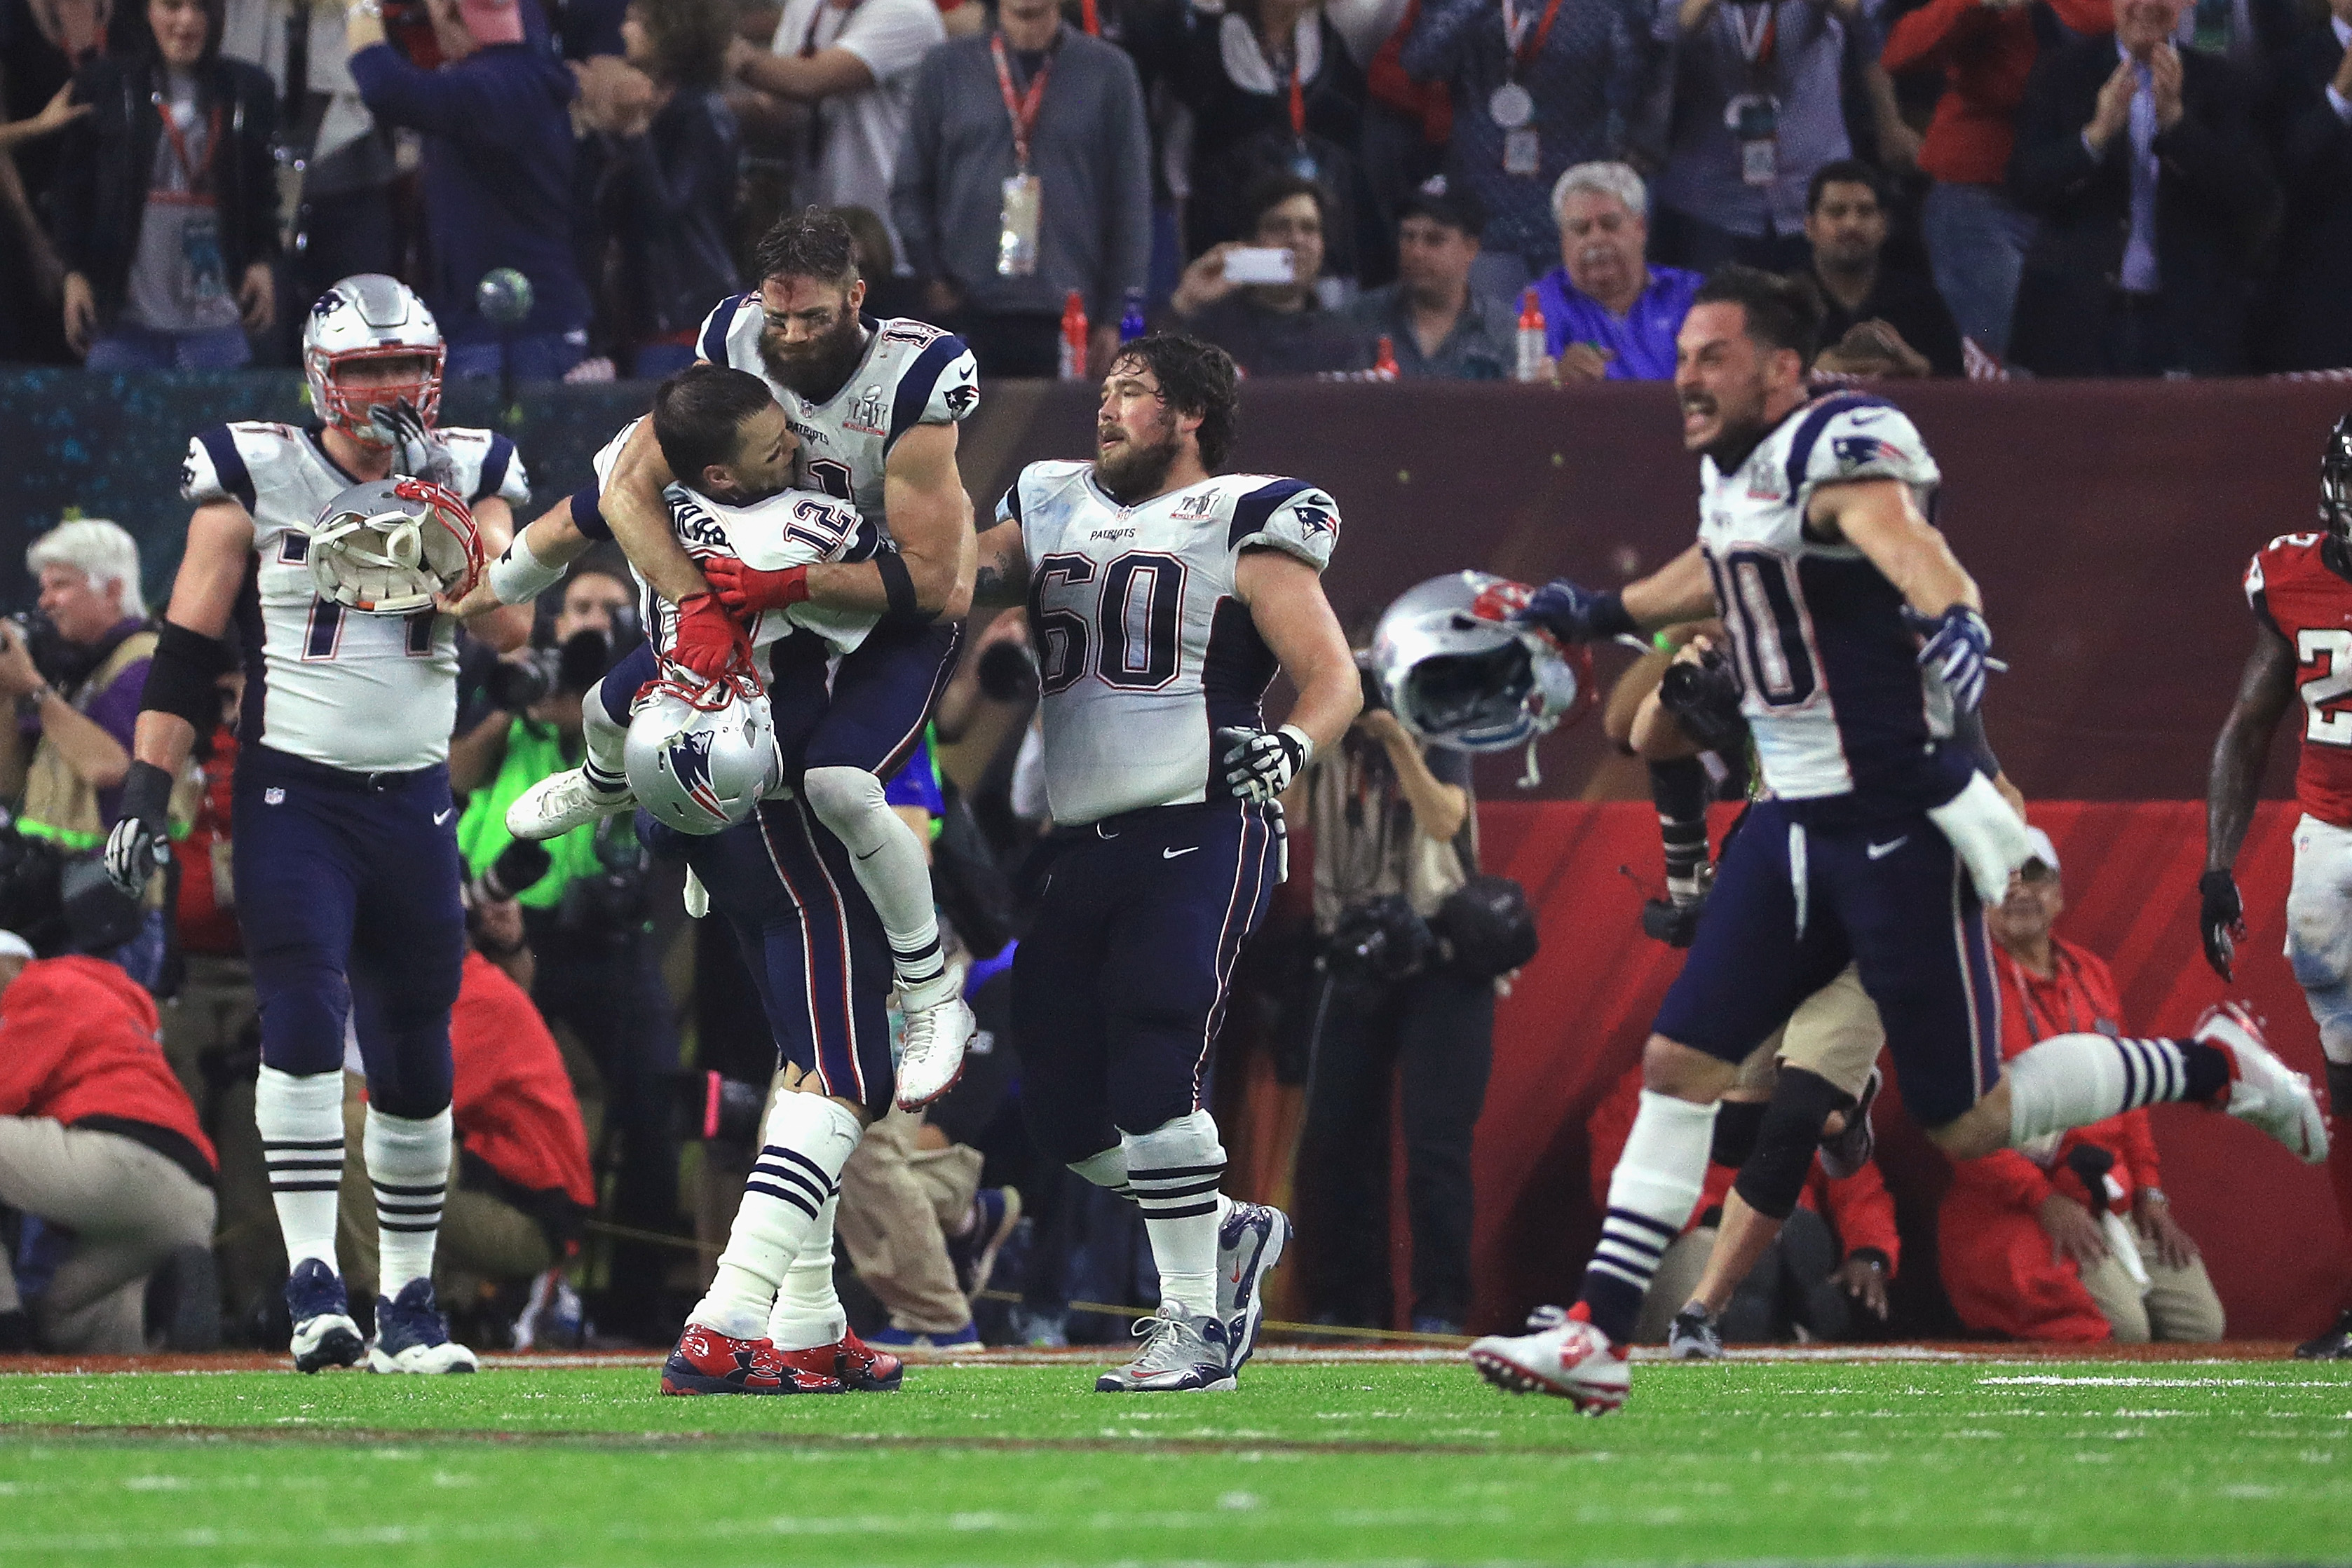 HOUSTON, TX - FEBRUARY 05: Tom Brady #12 of the New England Patriots celebrates after defeating the Atlanta Falcons 34-28 in overtime during Super Bowl 51 at NRG Stadium on February 5, 2017 in Houston, Texas. (Photo by Mike Ehrmann/Getty Images)